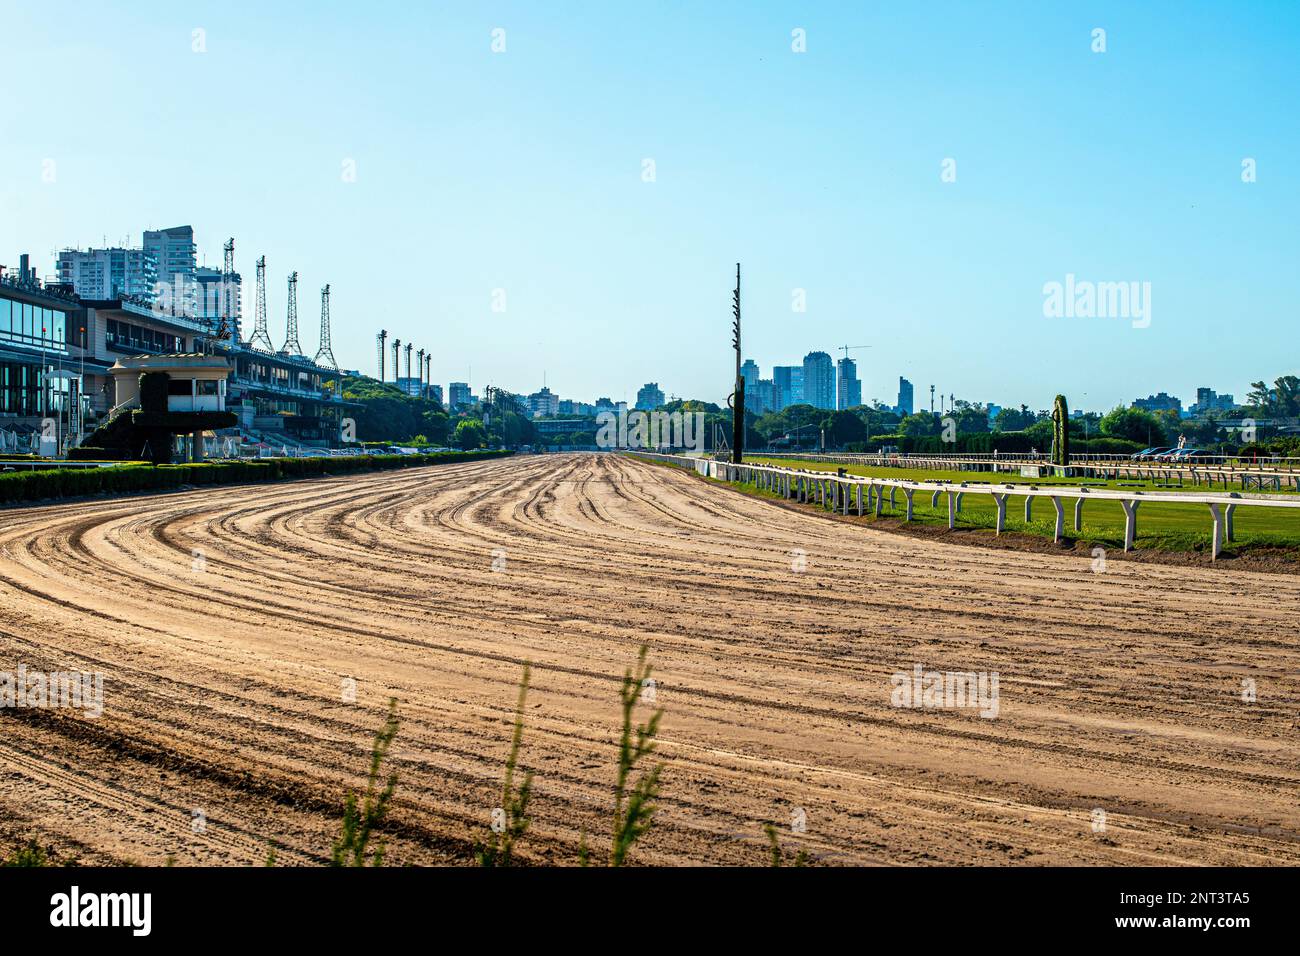 Racecourse, hippodrome. Palermo racetrack with an empty track. Buenos Aires, Argentina. Stock Photo